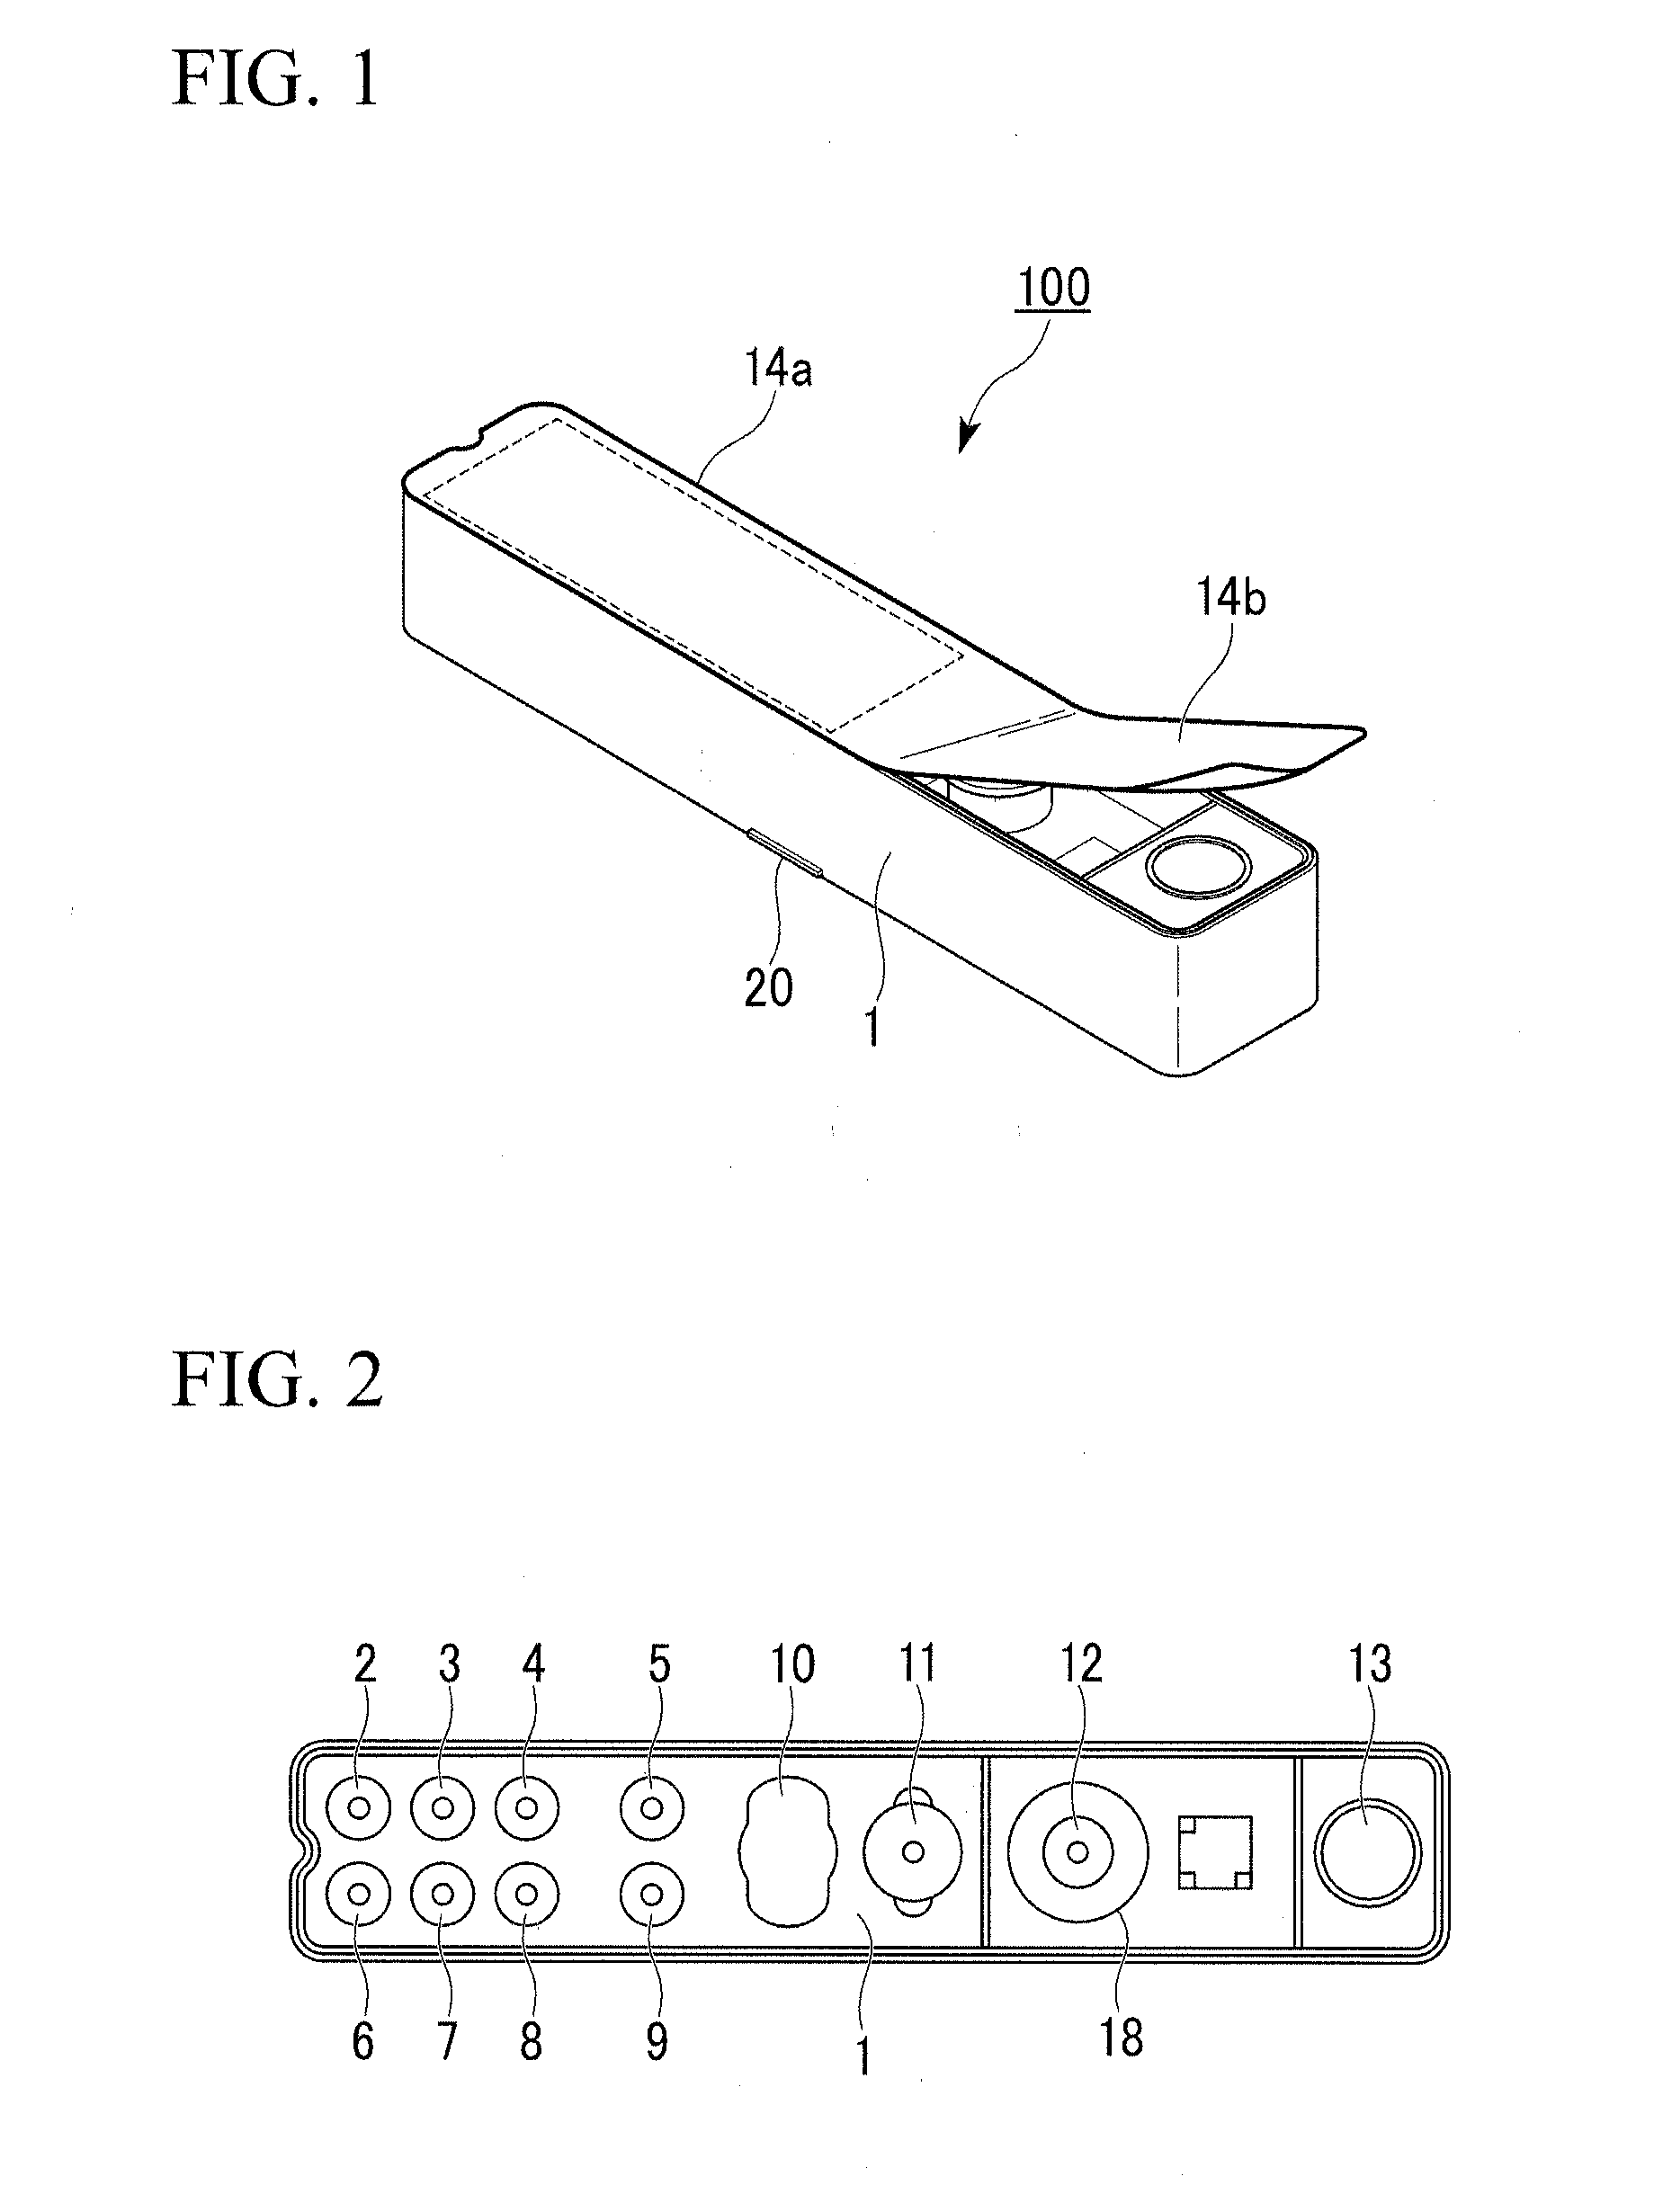 Nucleic acid extraction kit, nucleic acid extraction method, and nucleic acid extraction apparatus